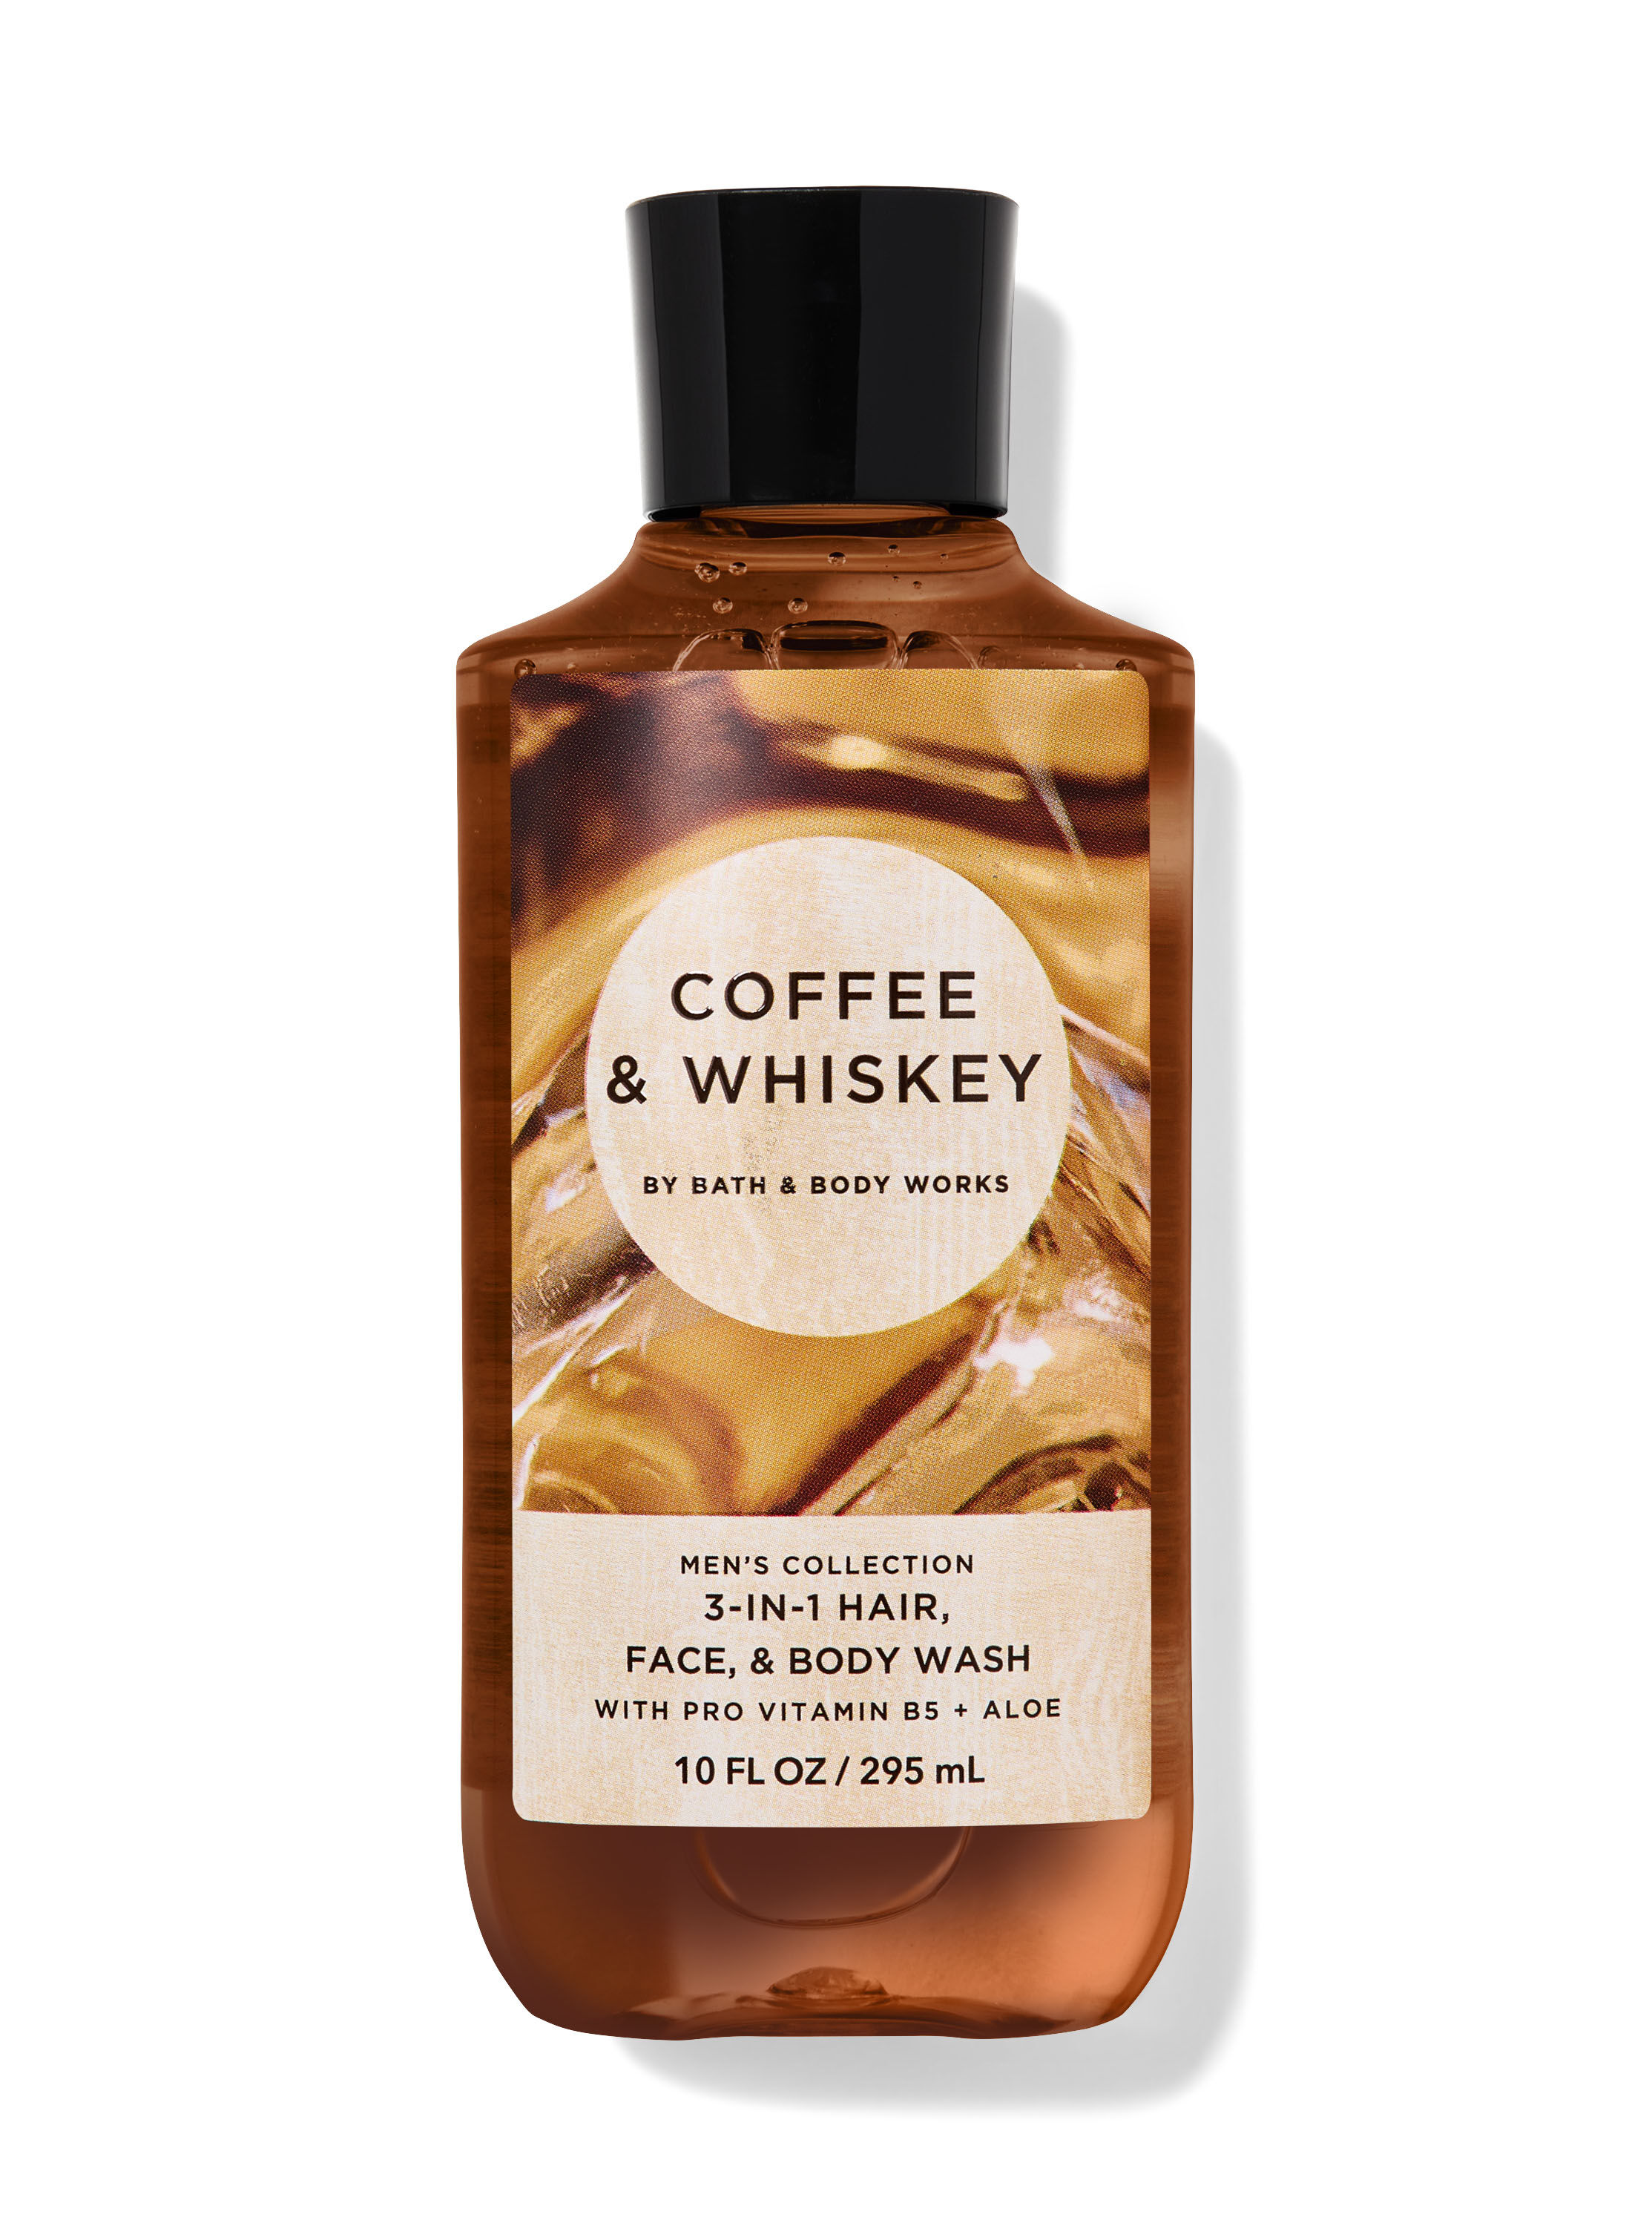 Coffee & Whiskey 3-in-1 Hair, Face & Body Wash